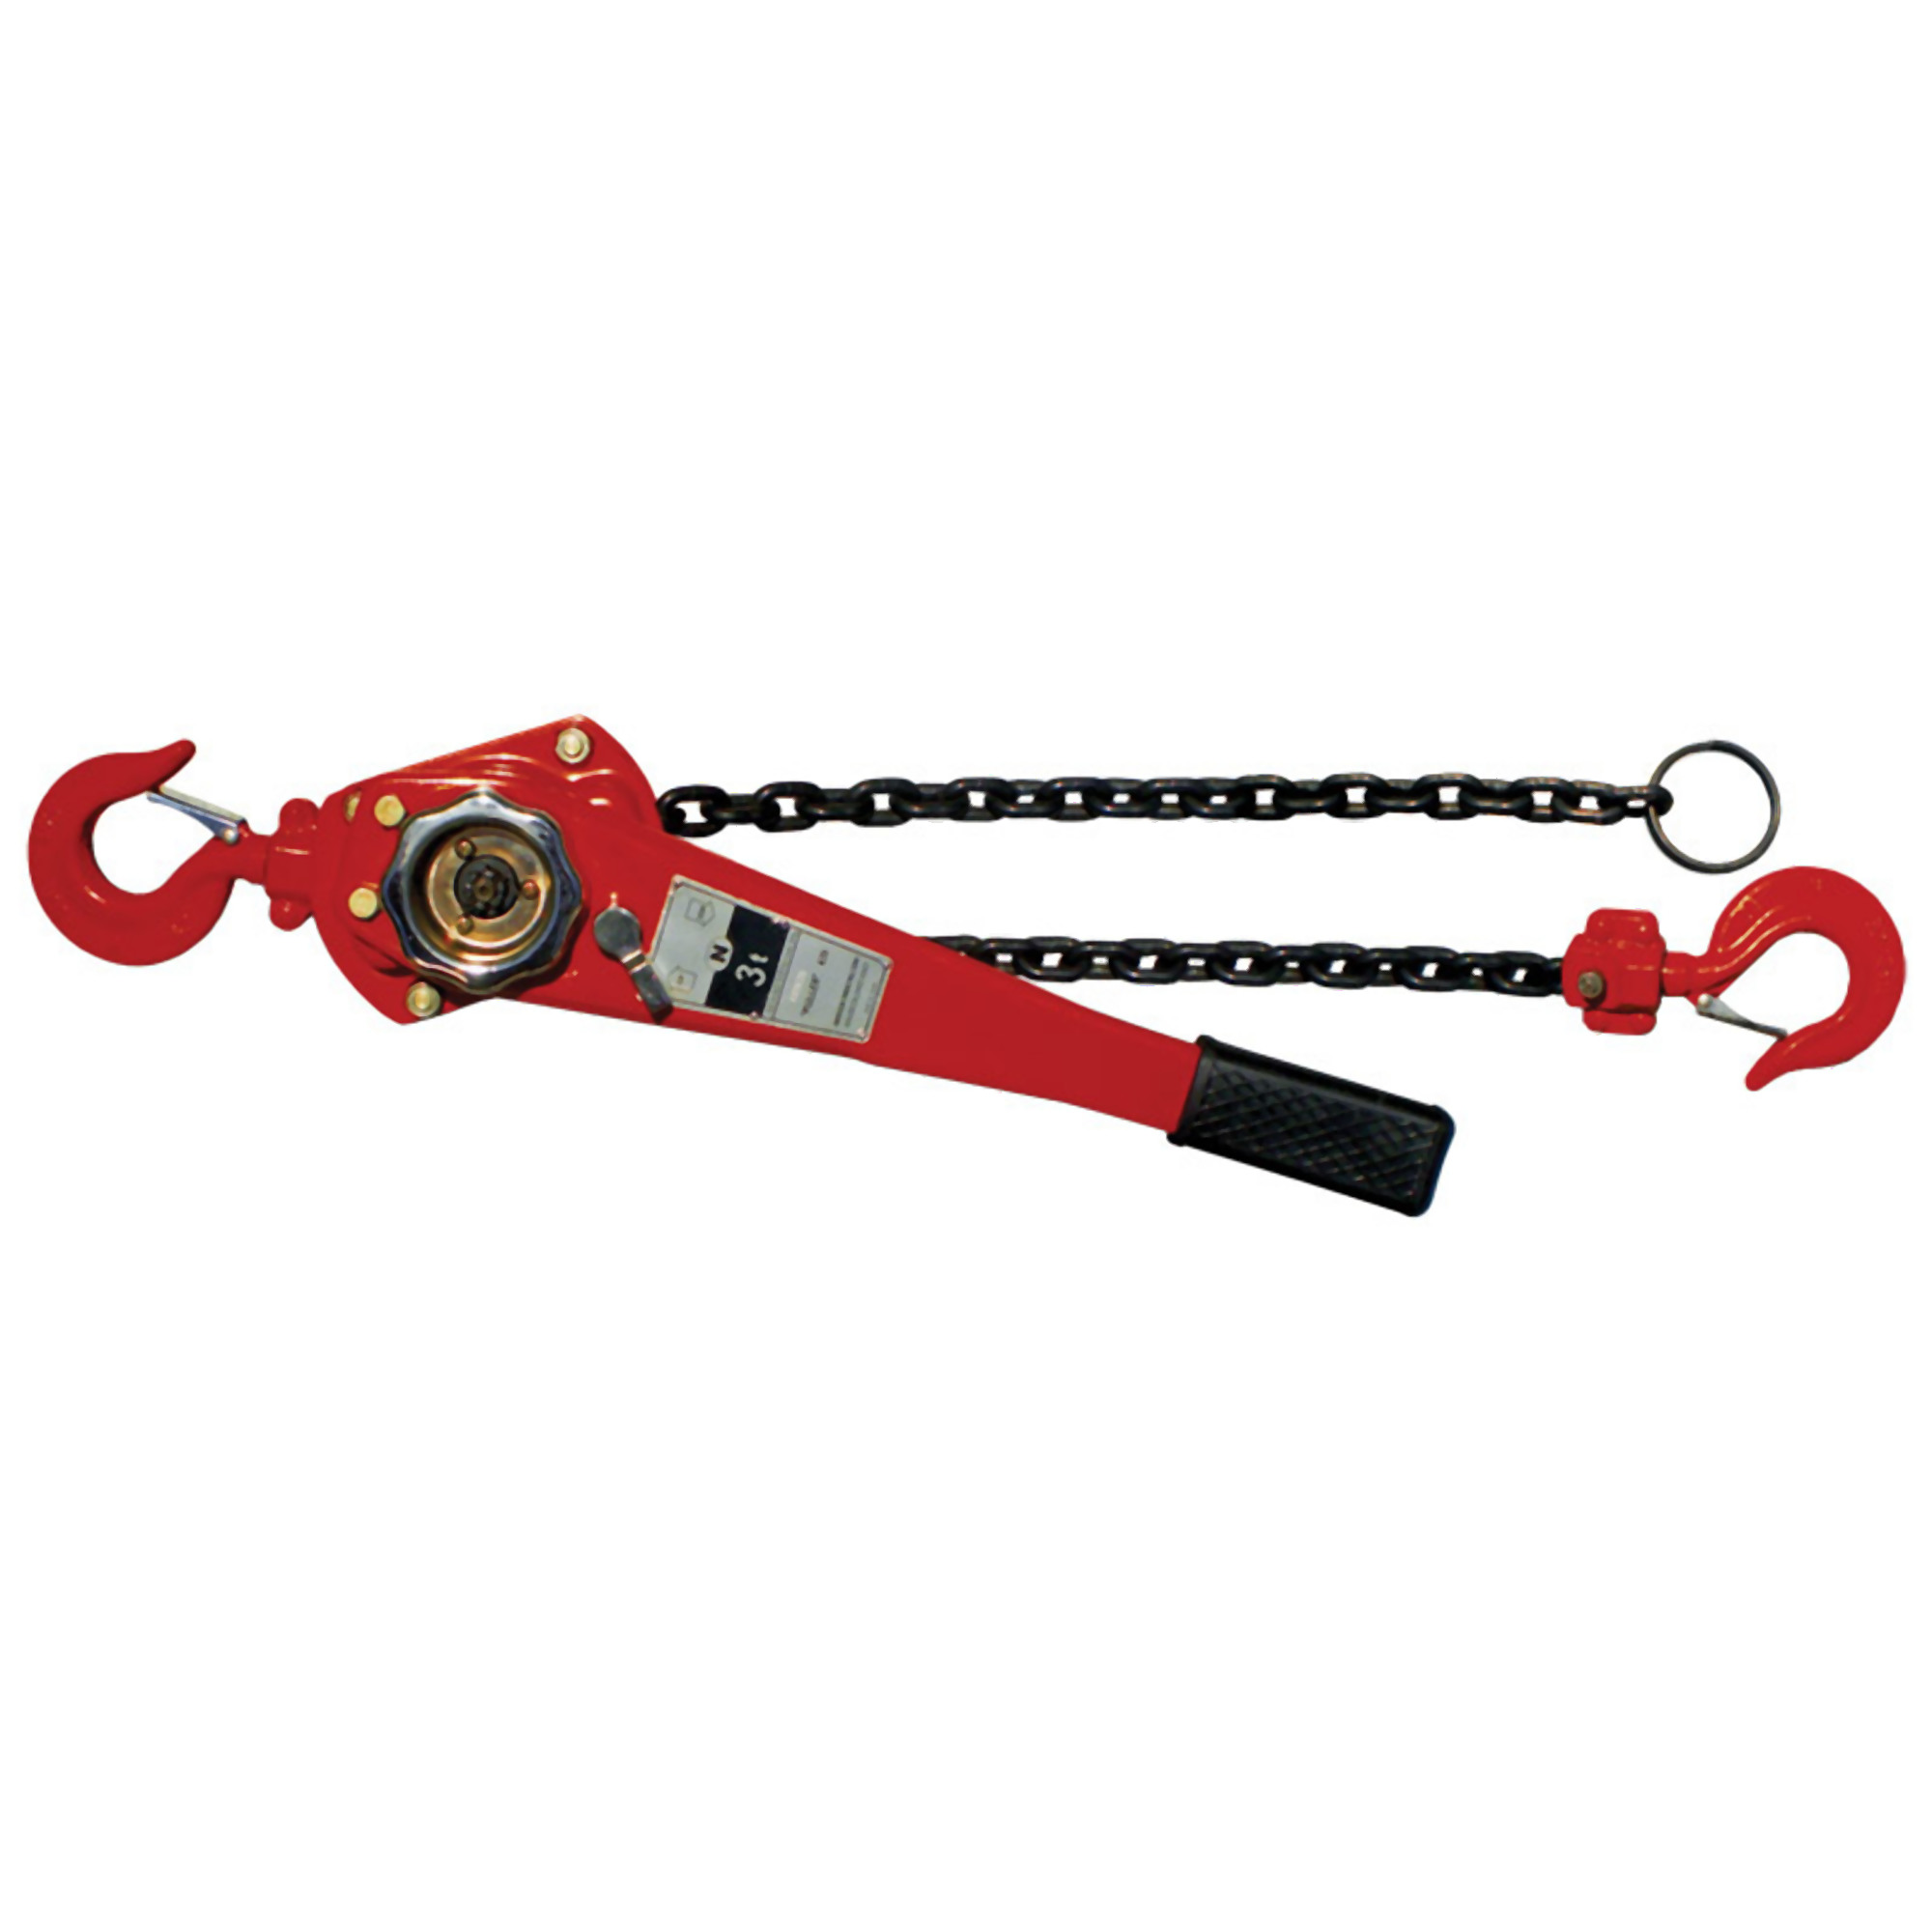 American Power Pull, 3 ton chain puller w/ 20ft. lift, Power Source Manual Lever, Capacity 6000 lb, Lift Height 20 ft, Model 635-20